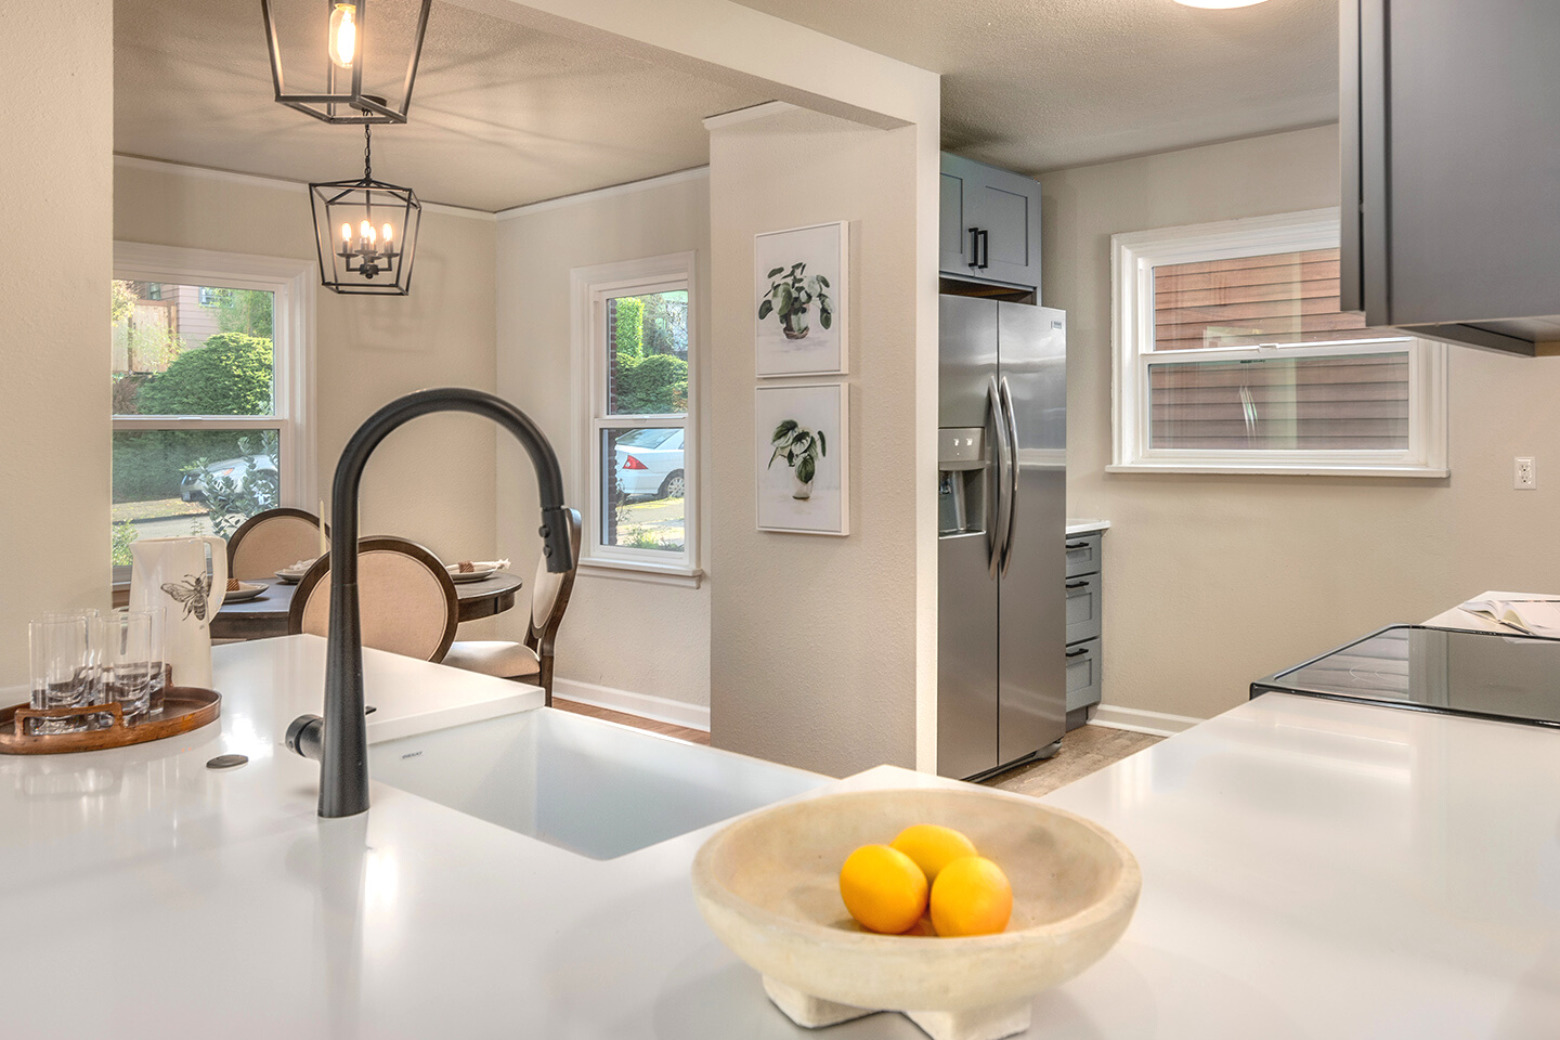 The Best Kitchen Countertops to Sell Homes For More